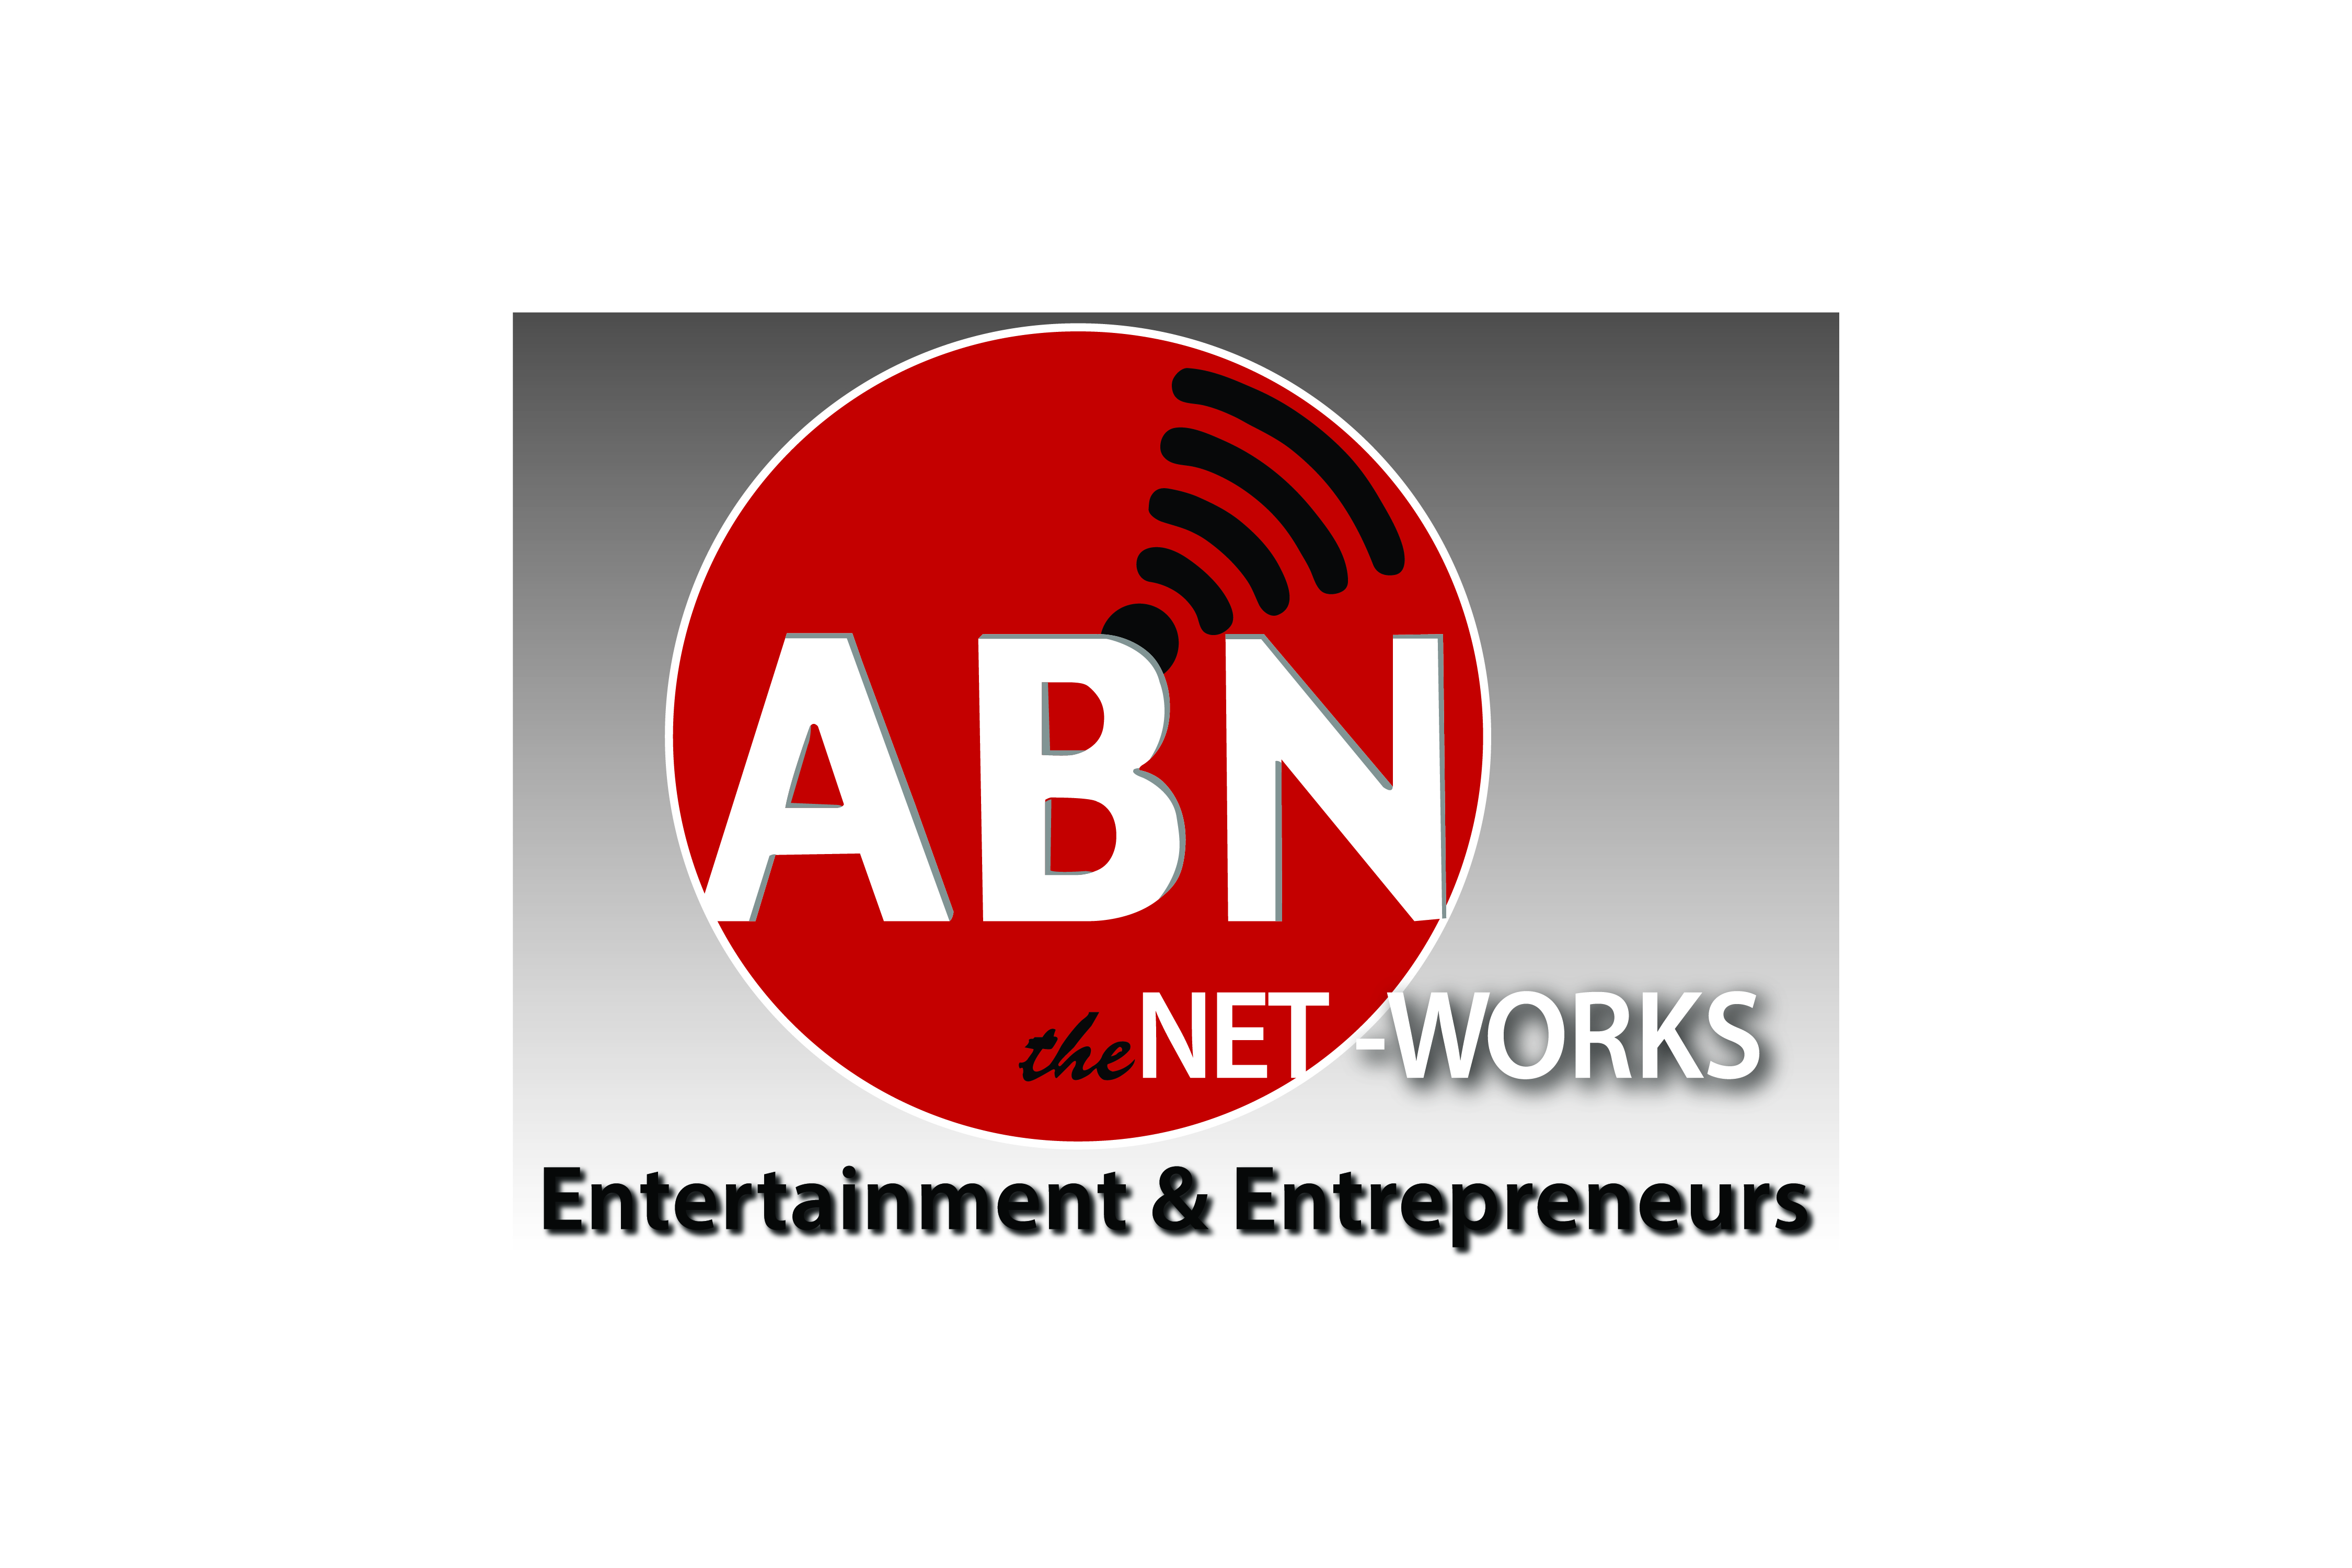 The ABN logo for our New Network and station for broadcasting ideas to build local and international economies with entrepreneurs and entertainers!